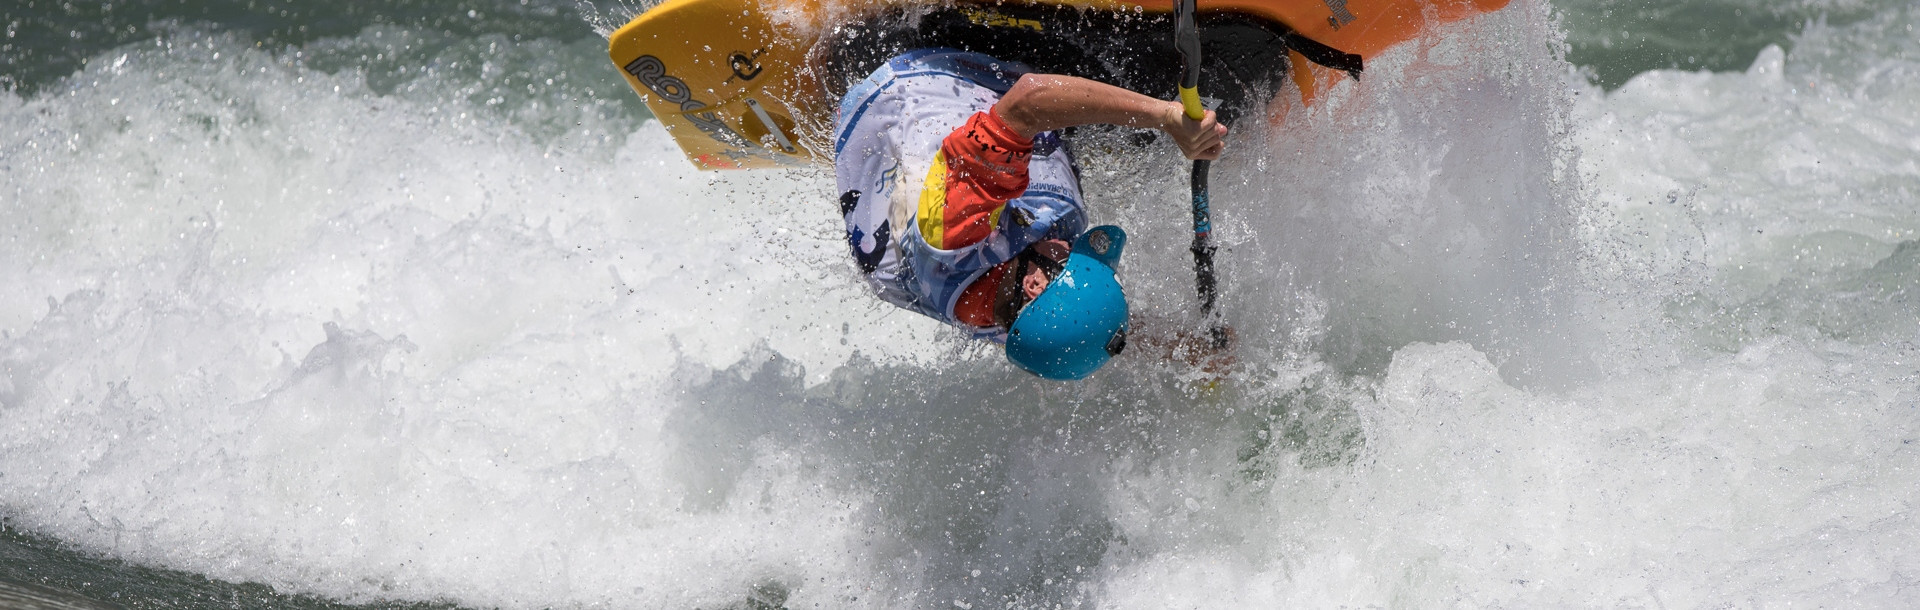 French prodigy tops men's junior kayak preliminary rankings at ICF Canoe Freestyle World Championships